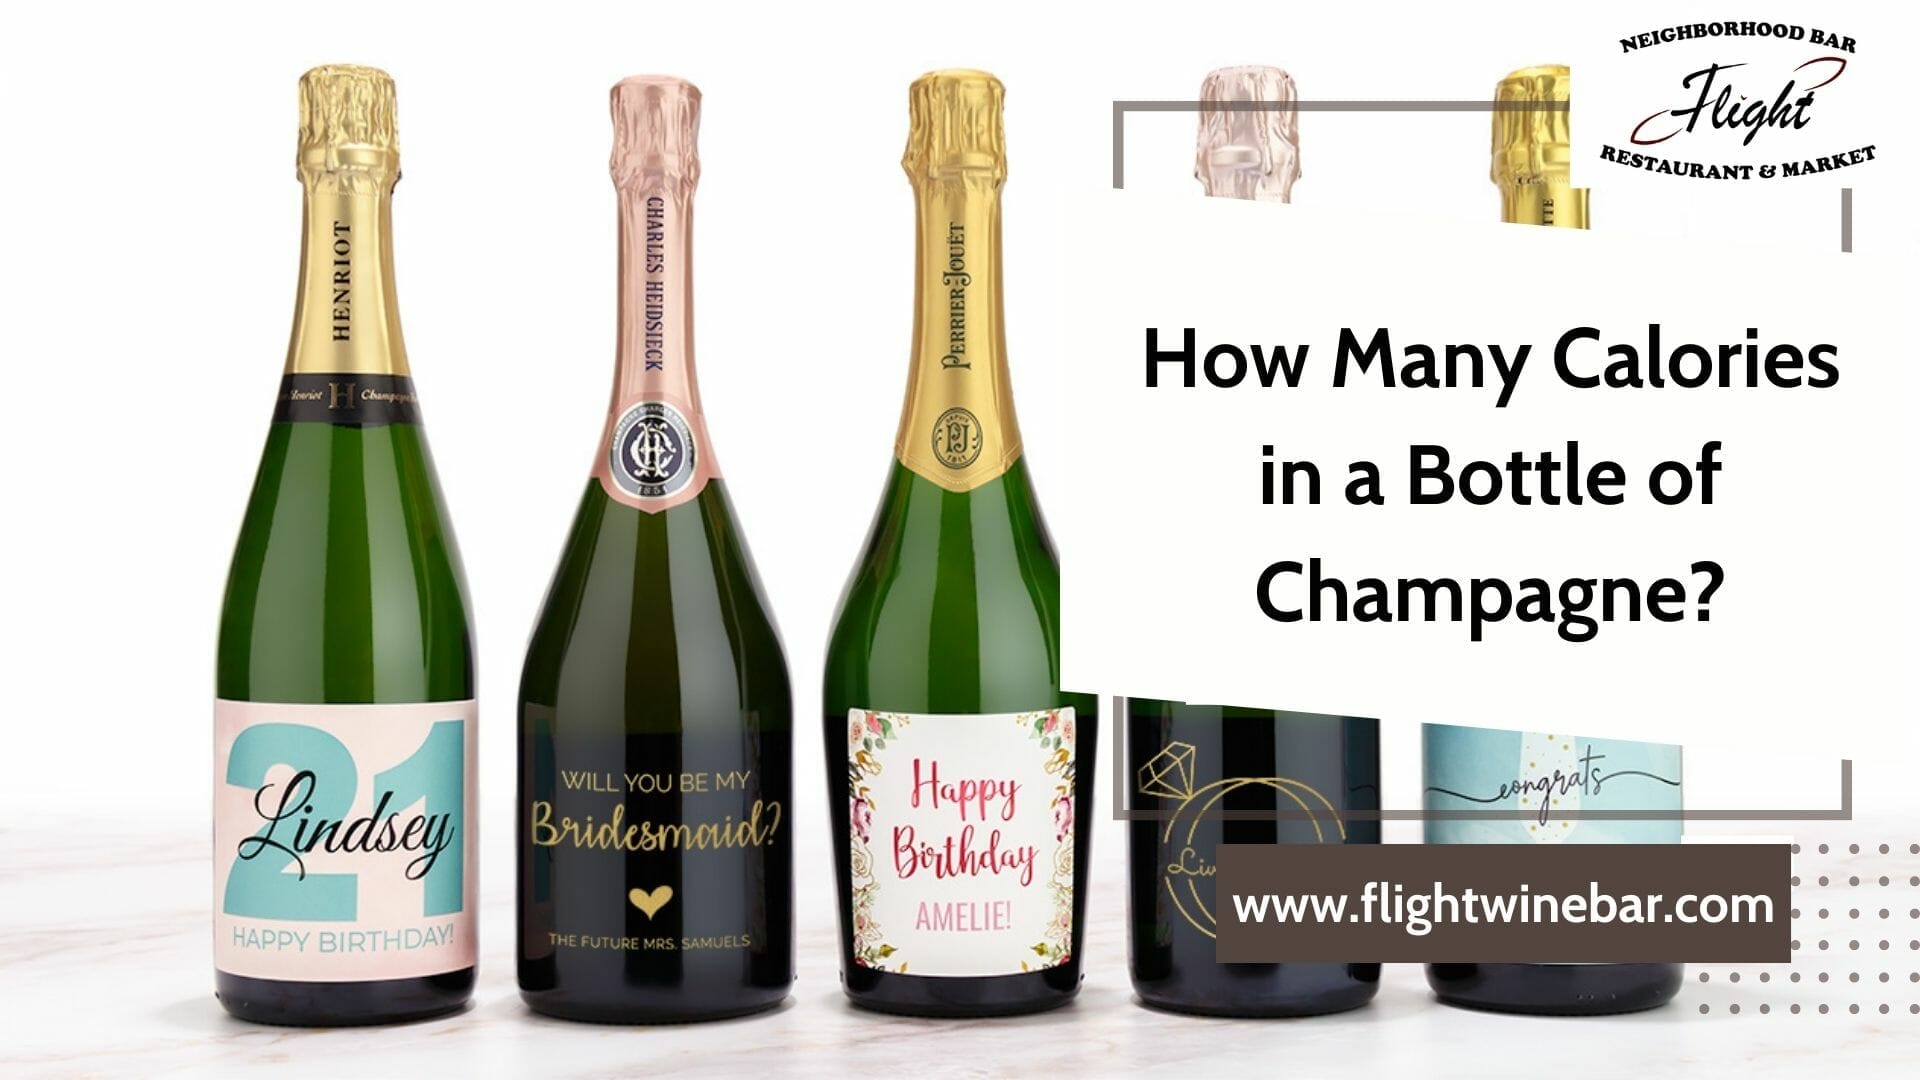 How Many Calories in a Bottle of Champagne